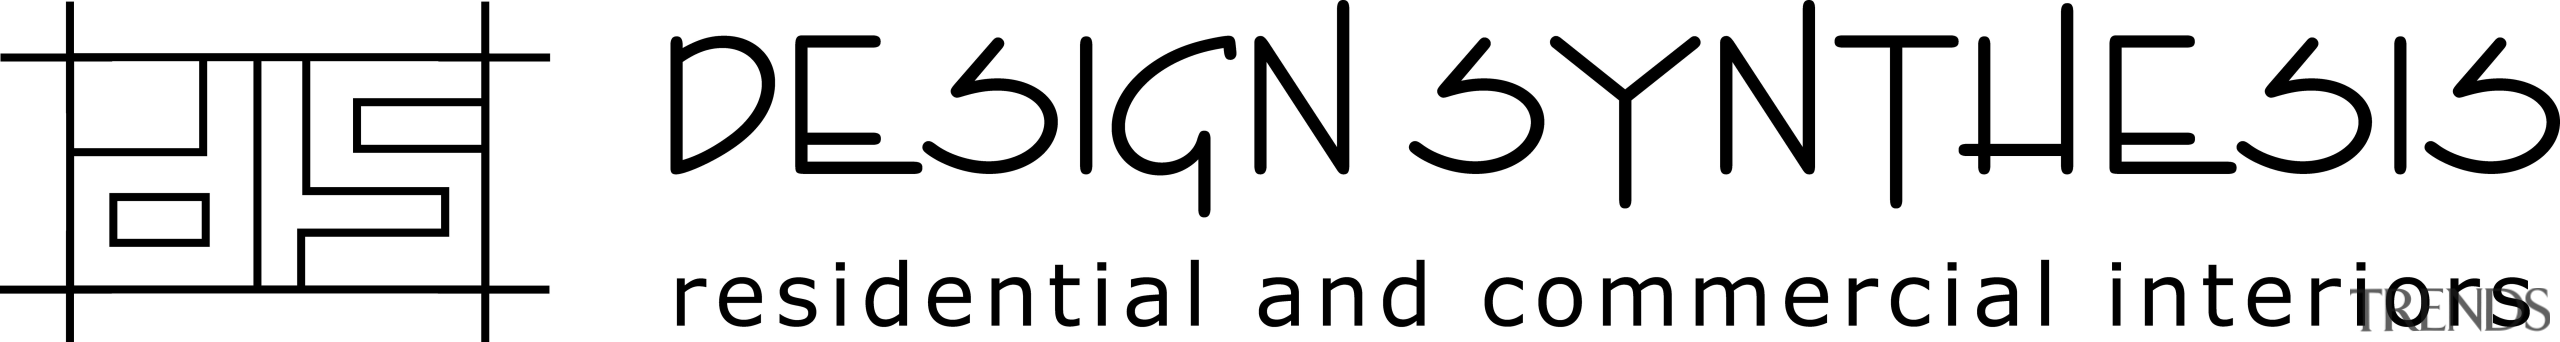 Design Synthesis logo - Design Synthesis logo - angle, black, black and white, brand, design, font, graphic design, line, logo, monochrome, monochrome photography, music, number, pattern, text, white, white